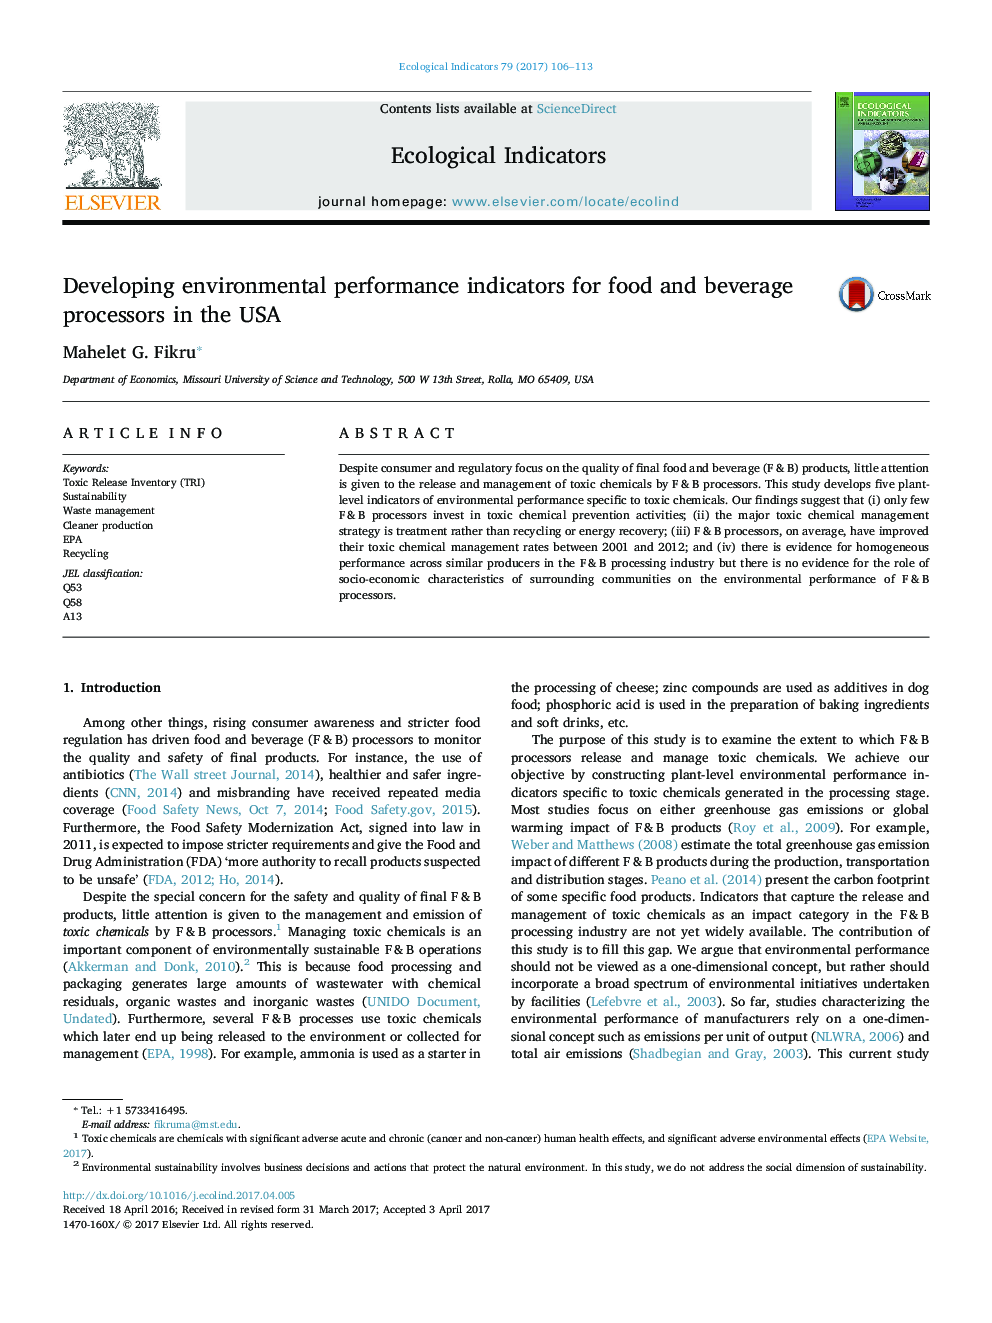 Developing environmental performance indicators for food and beverage processors in the USA